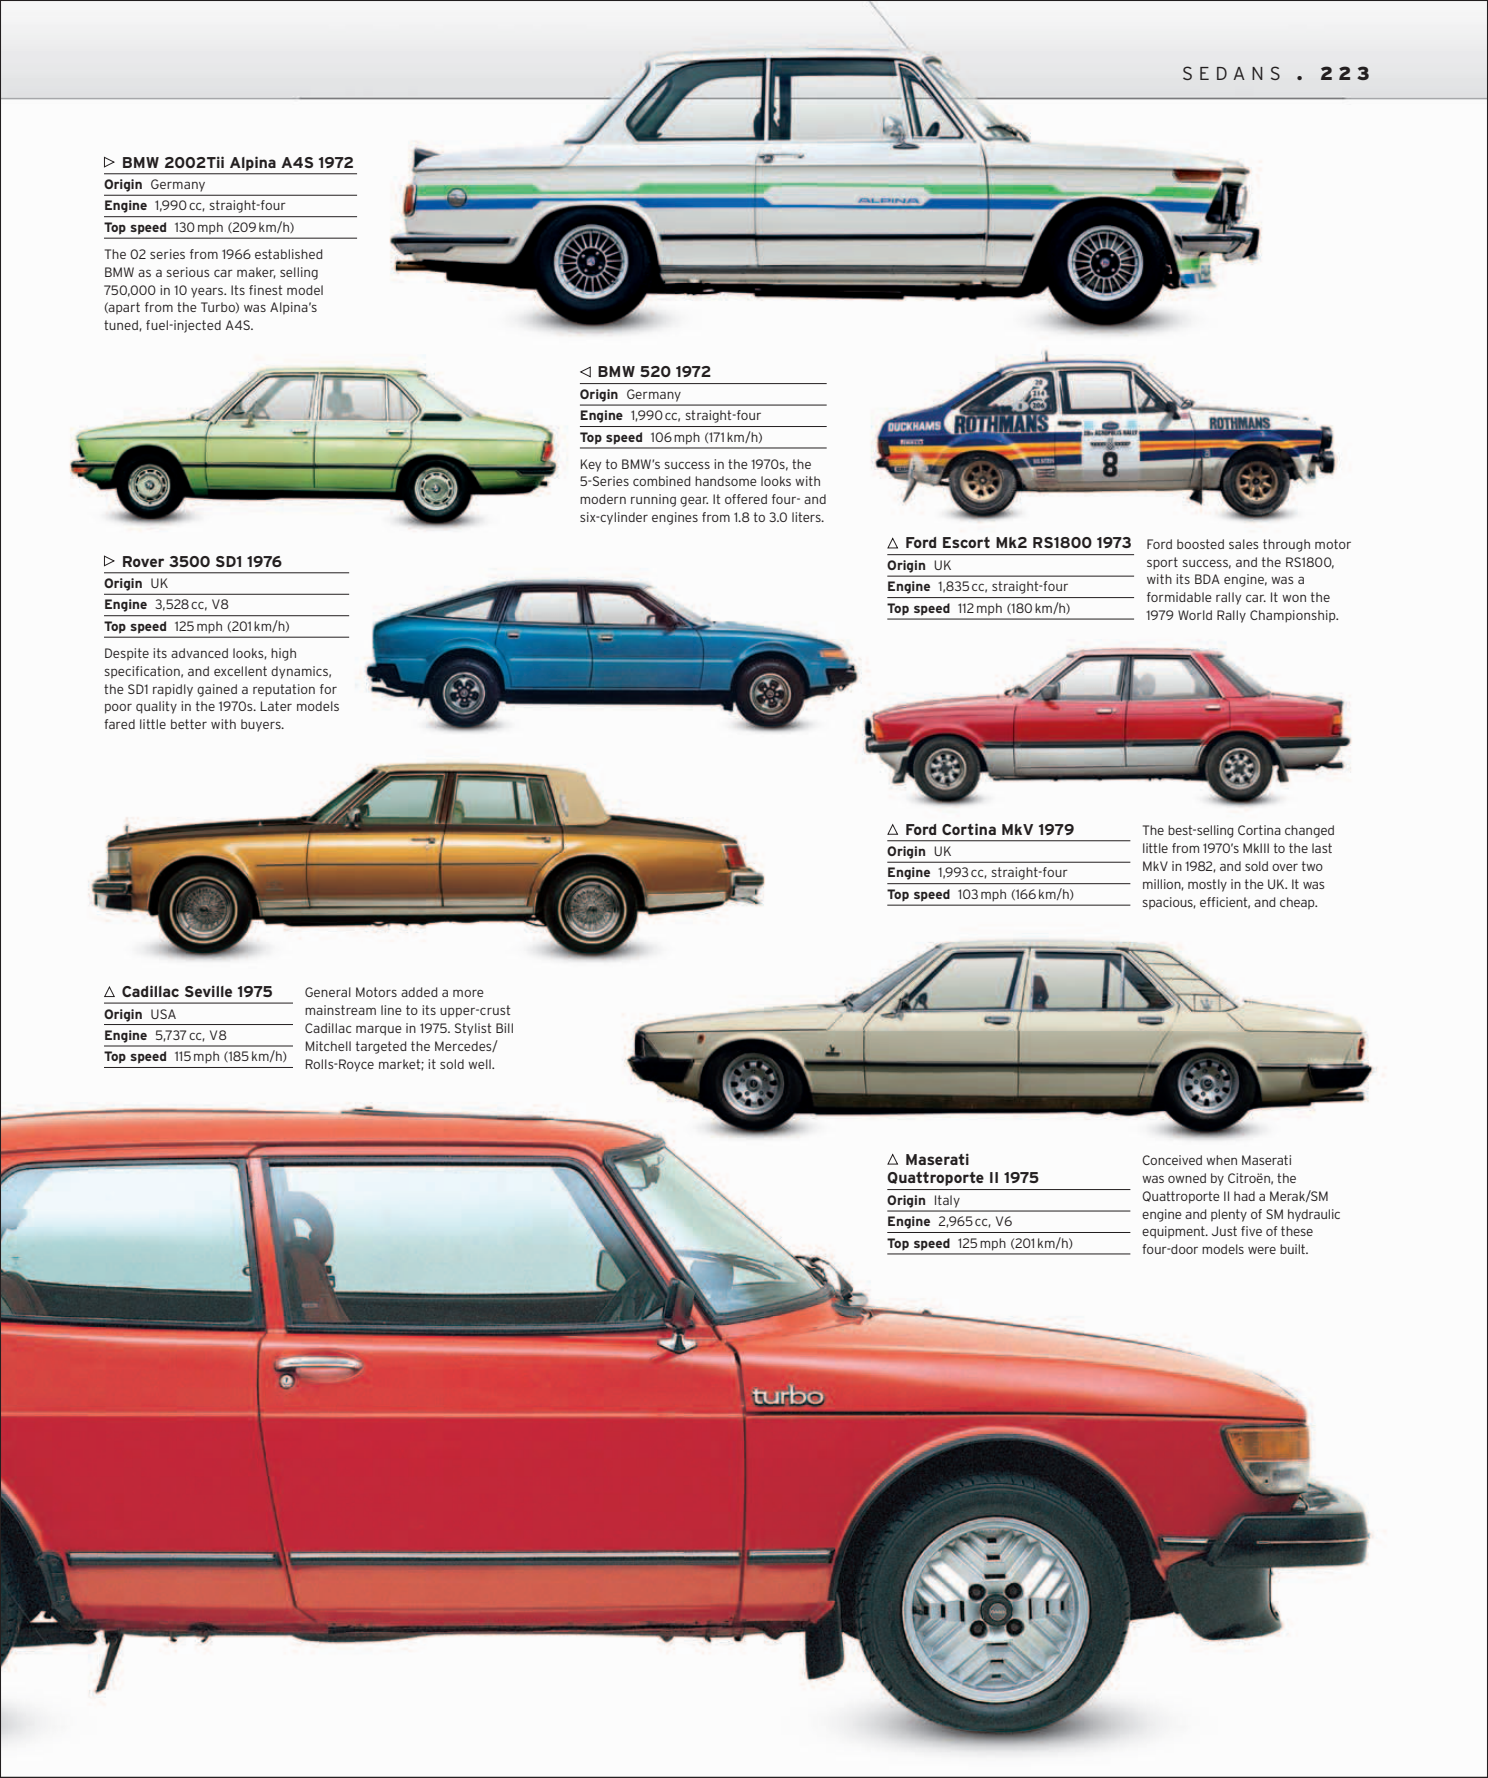 Car%20-%20The%20Definitive%20Visual%20History%20of%20the%20Automobile_225.png